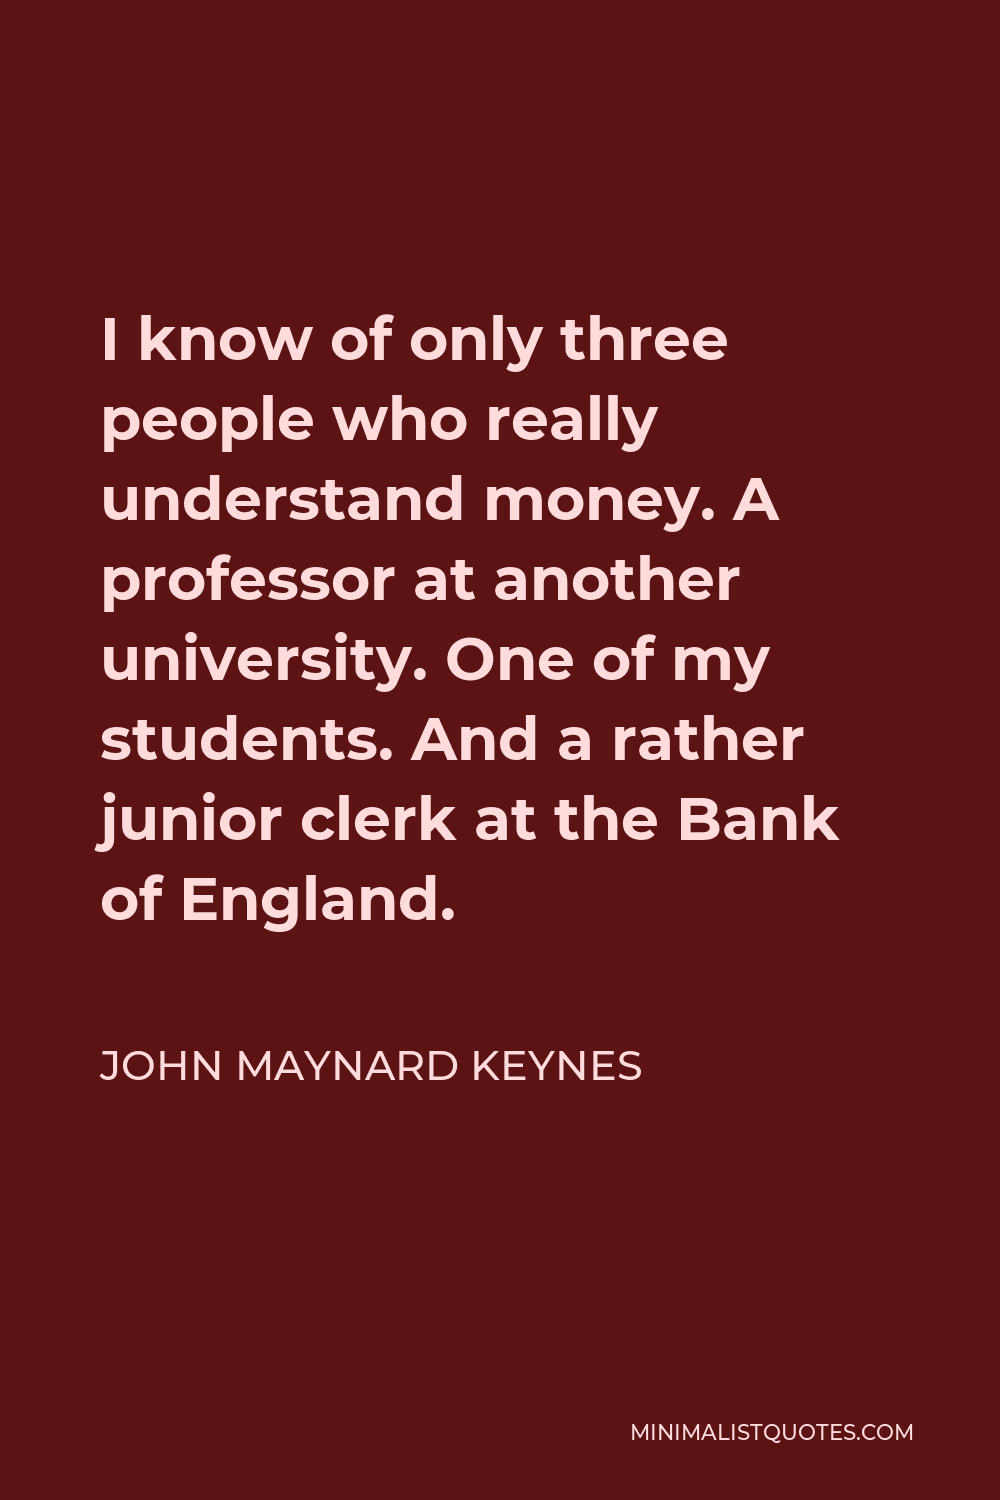 John Maynard Keynes Quote - I know of only three people who really understand money. A professor at another university. One of my students. And a rather junior clerk at the Bank of England.